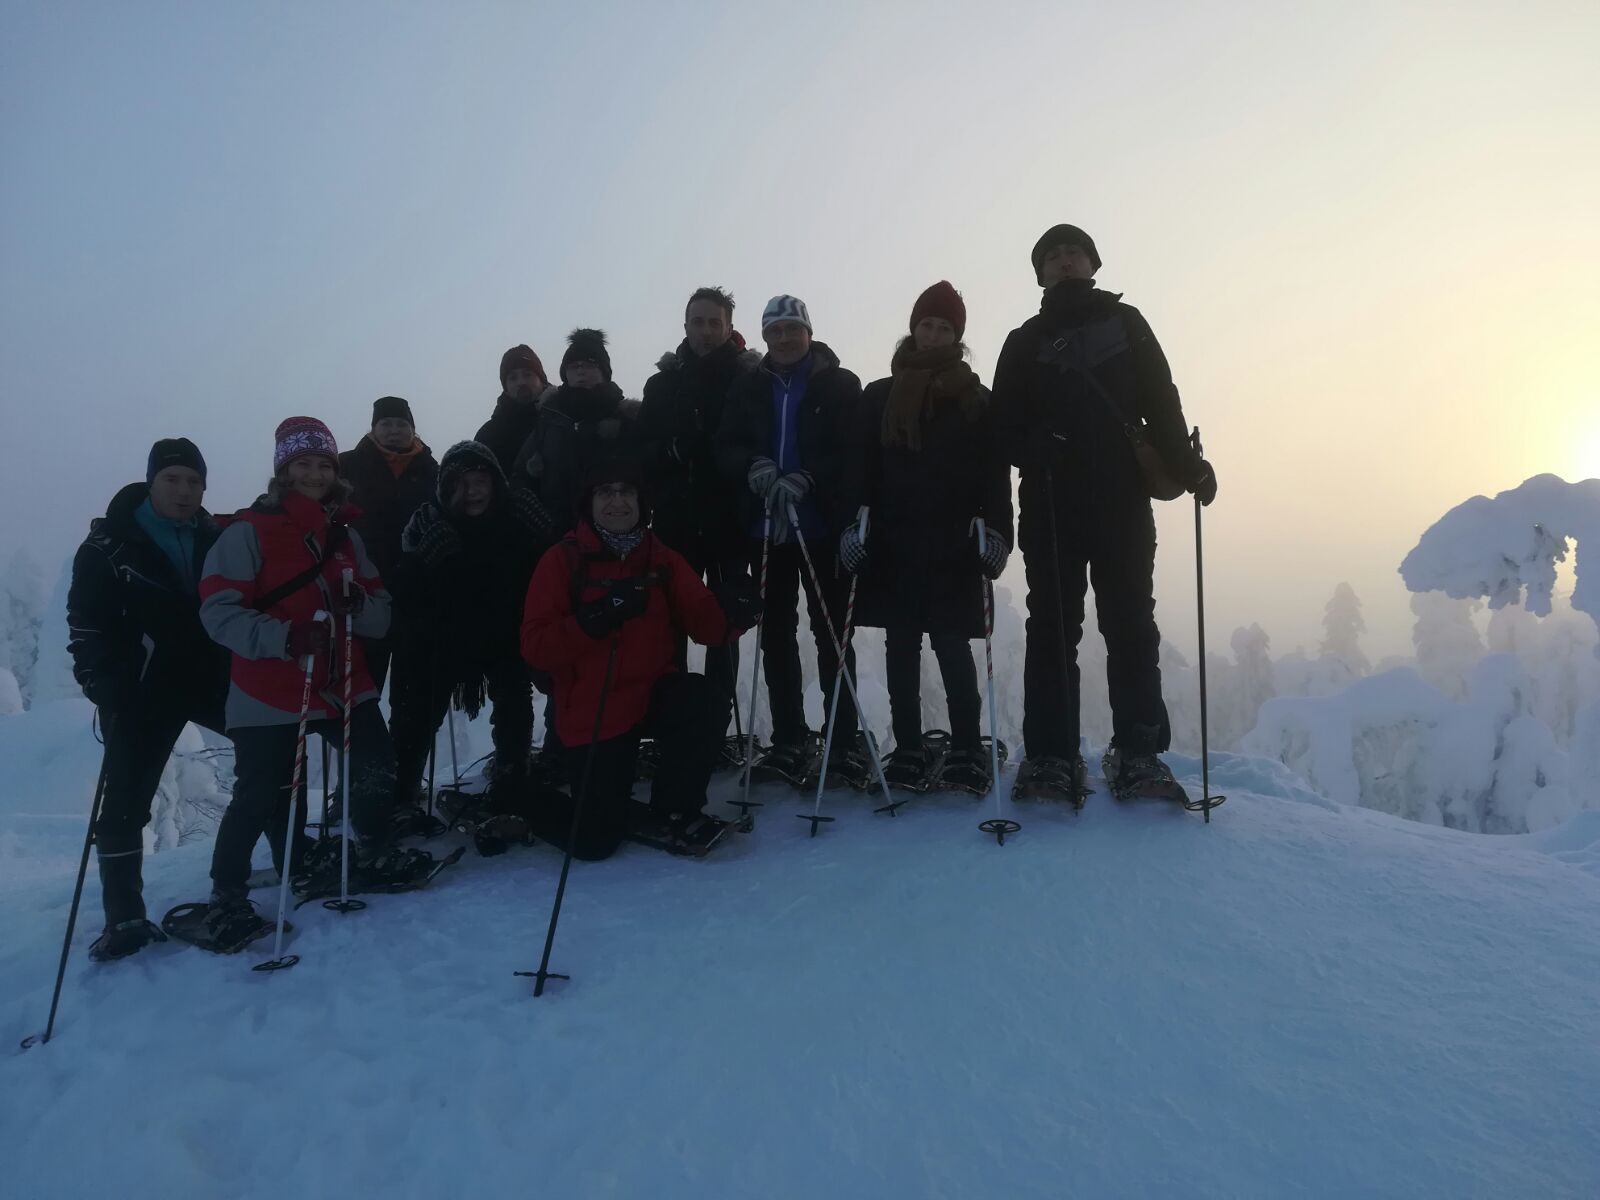 group photo on an excursion with snowshoes